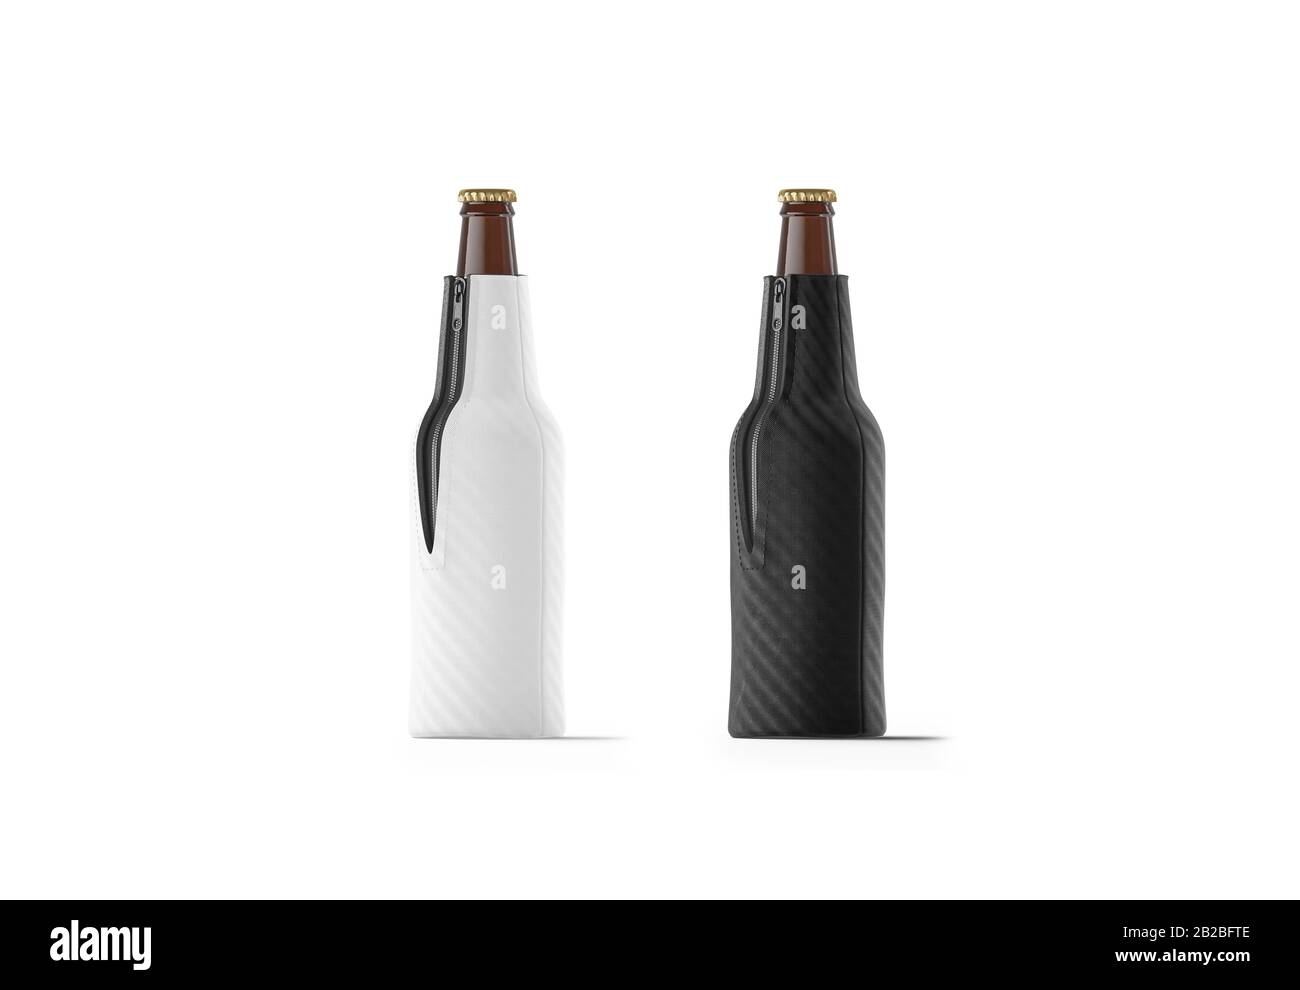 Blank black and white collapsible beer bottle koozie mockup, isolated Stock Photo